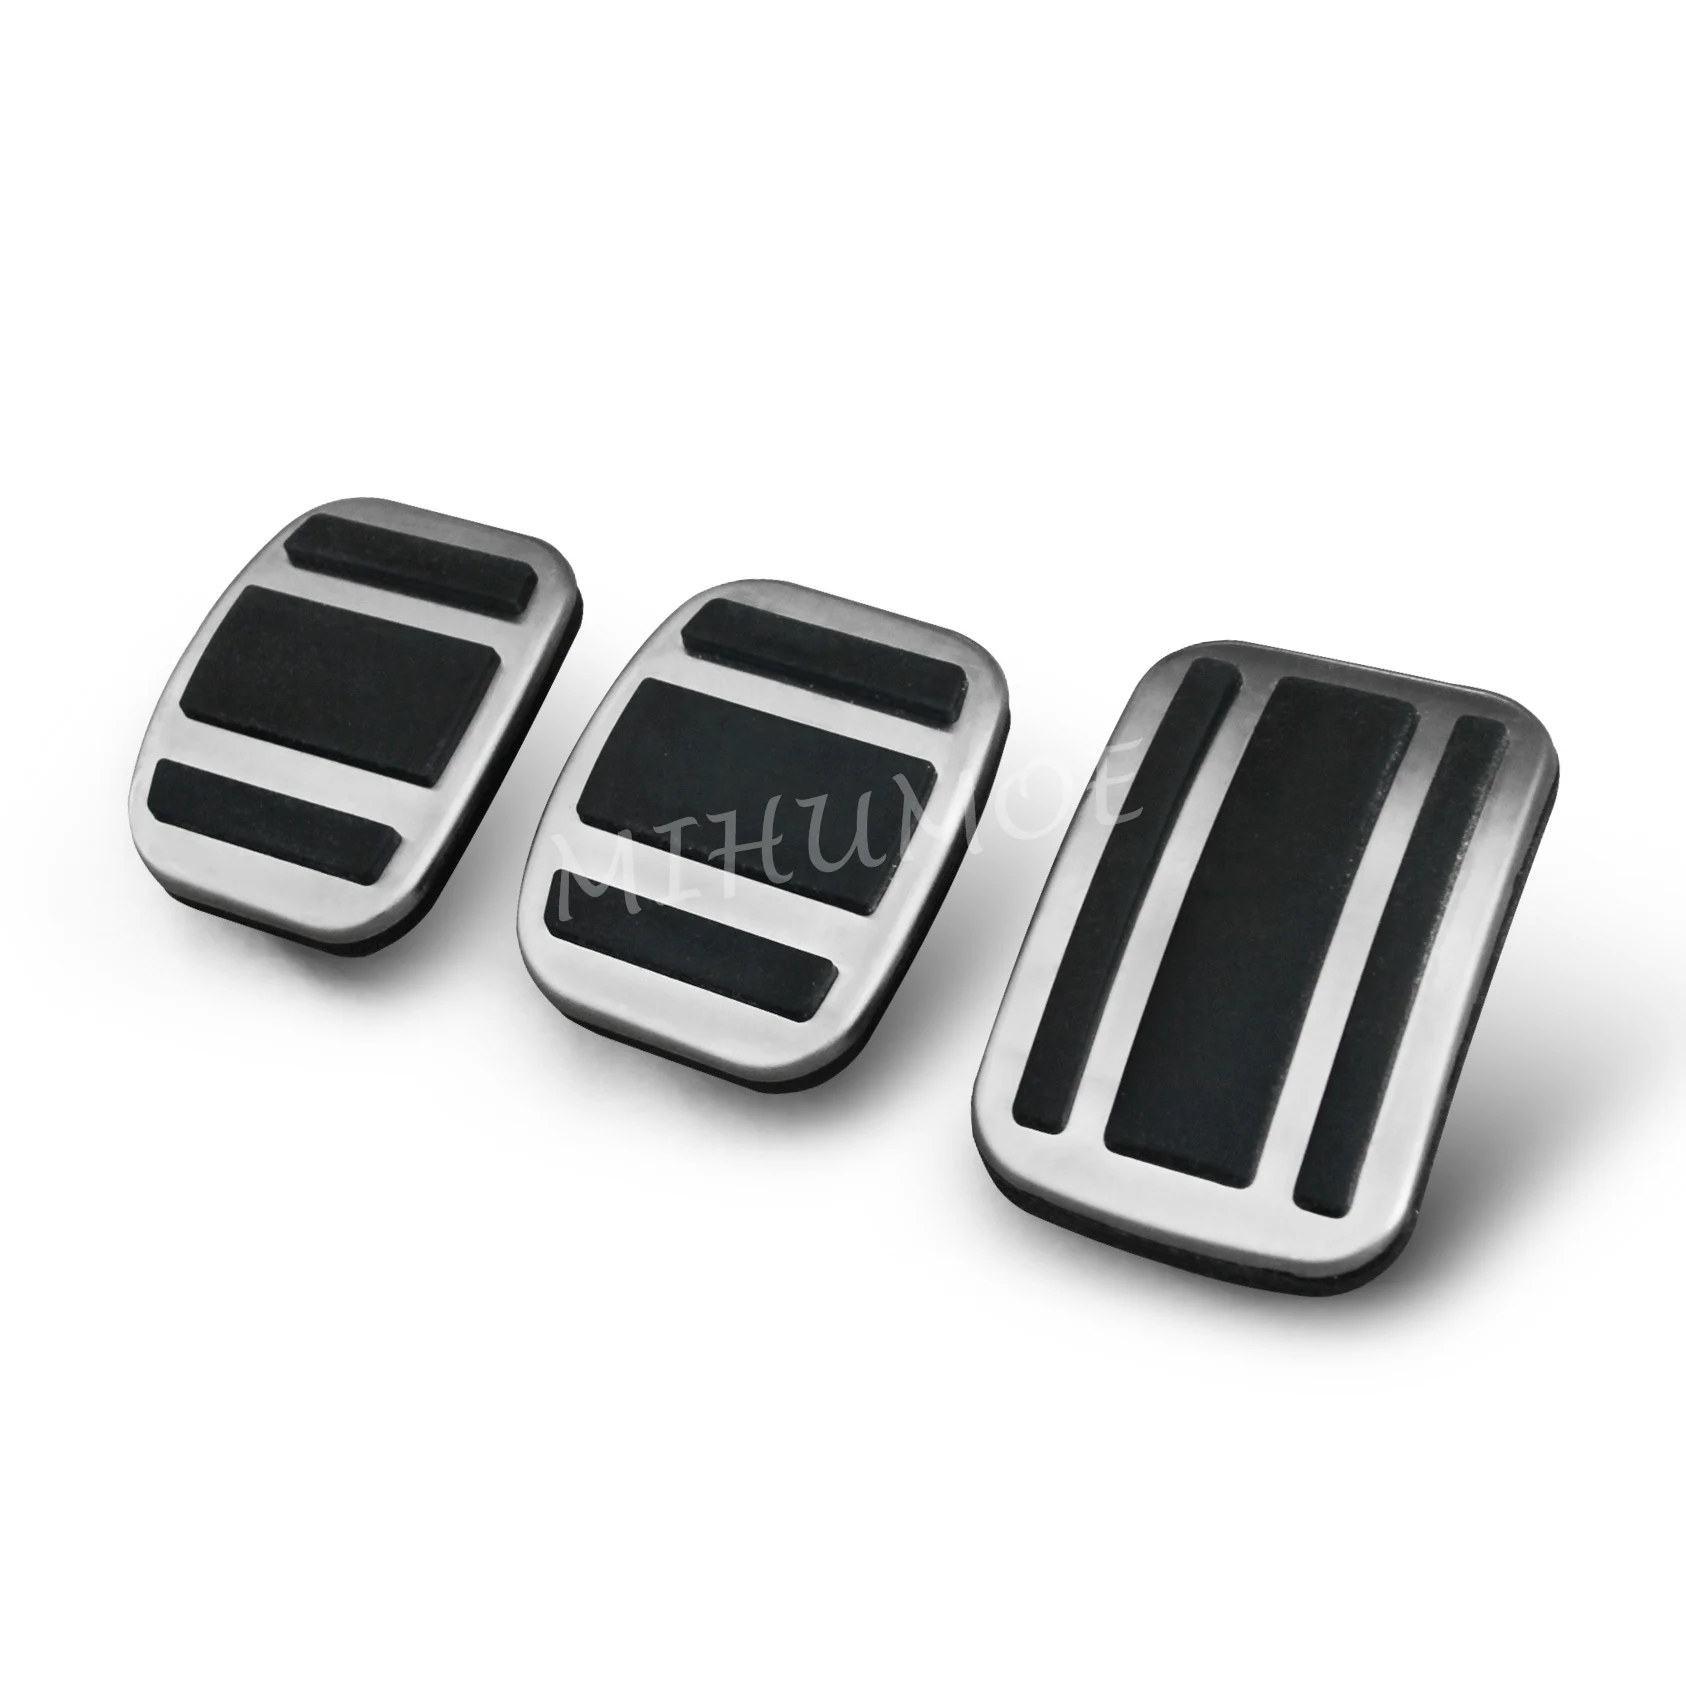 

Clutch Brake Gas Pedal Pad Cover Set For Peugeot 3008 GT 5008 508 SW Citroen C5 Aircross DS7 Crossback Opel Manual